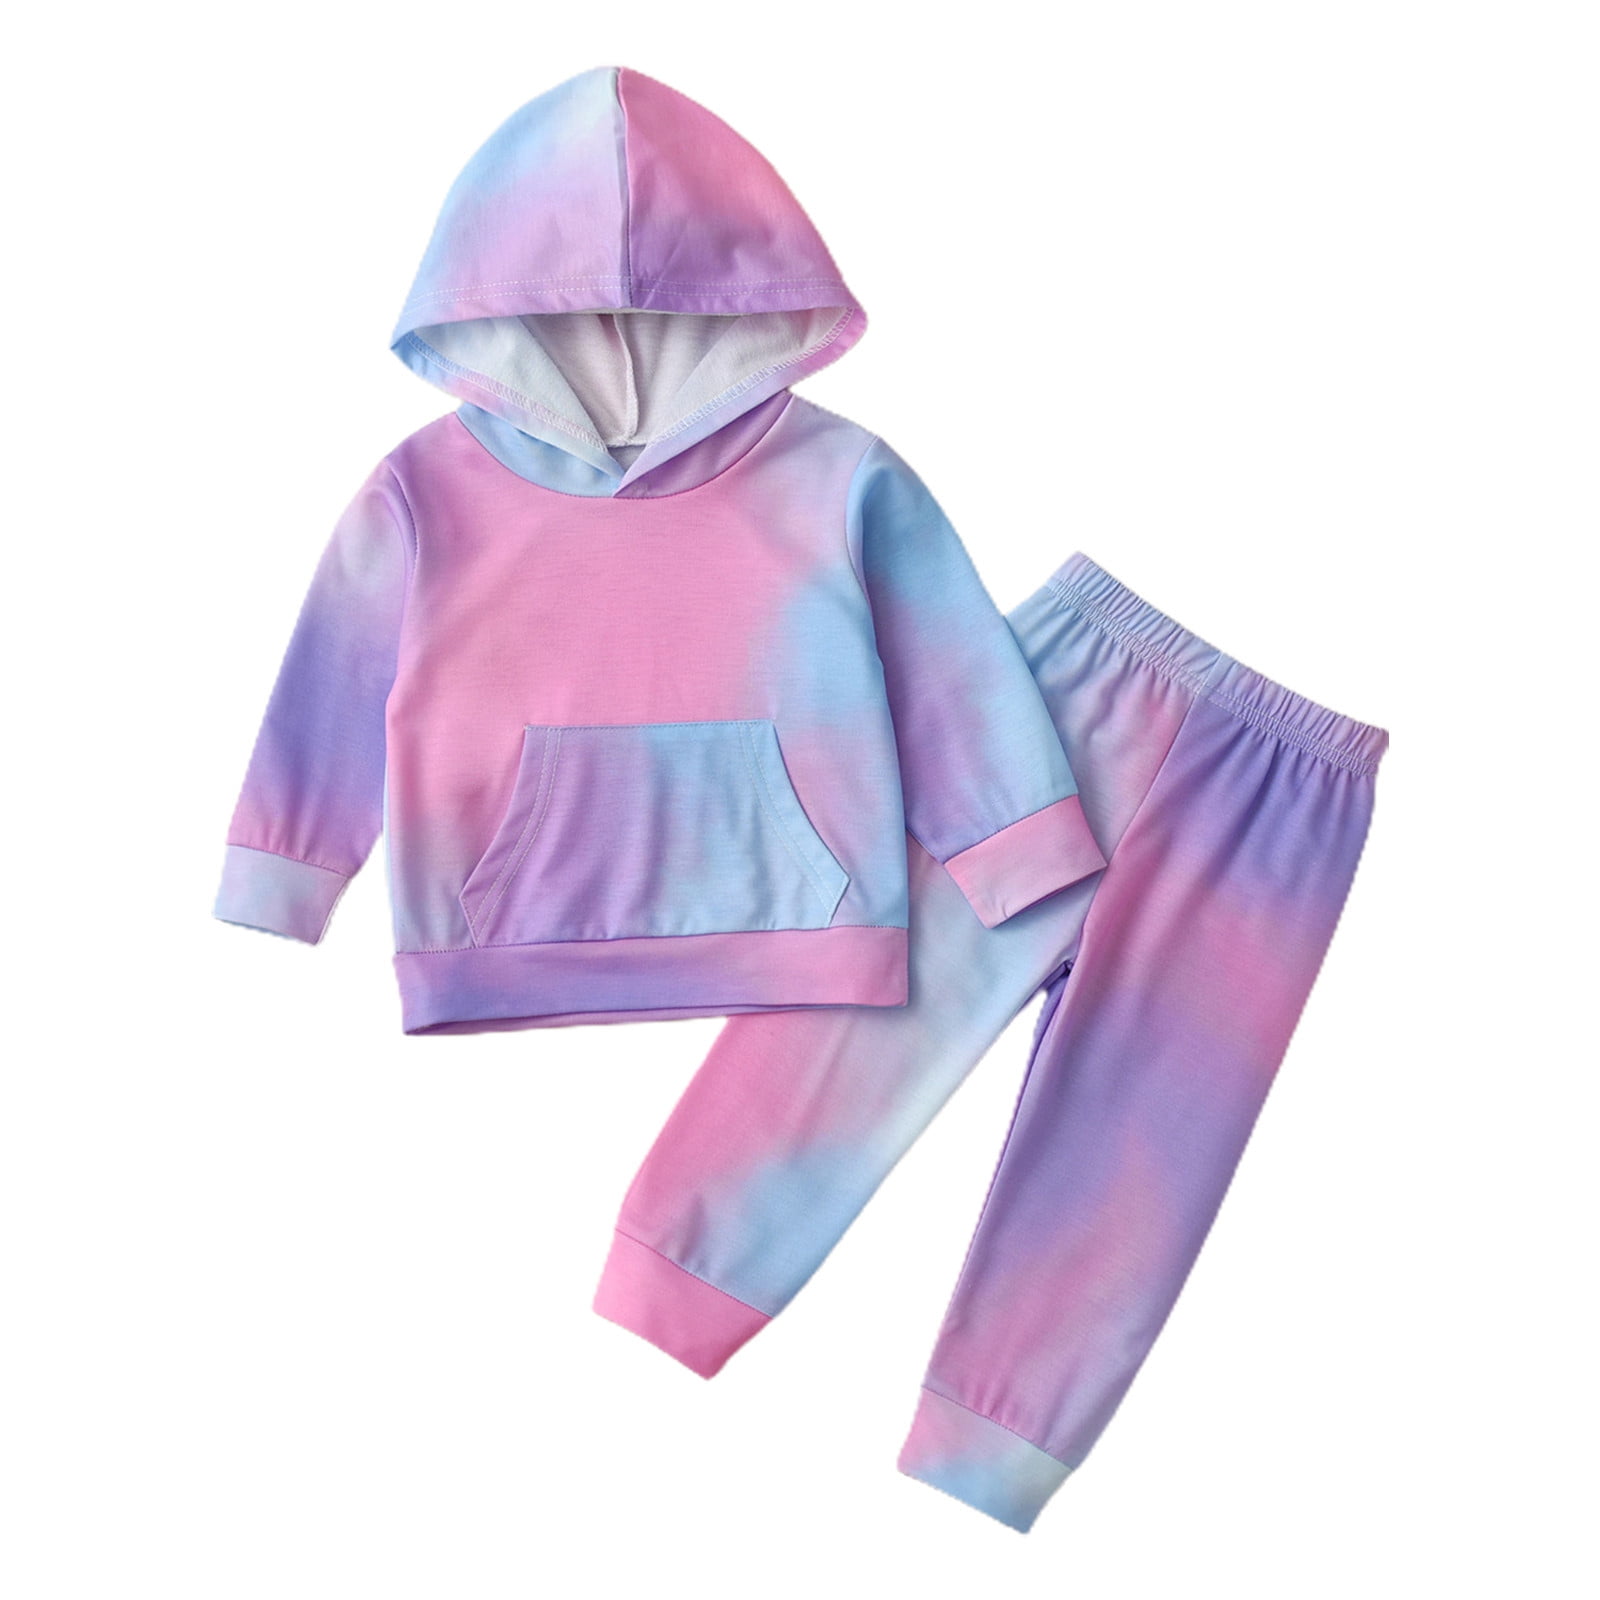 Toddler Girls Outfits Long Sleeve Tie Dye Hooded Tops And Pants 2Pcs ...